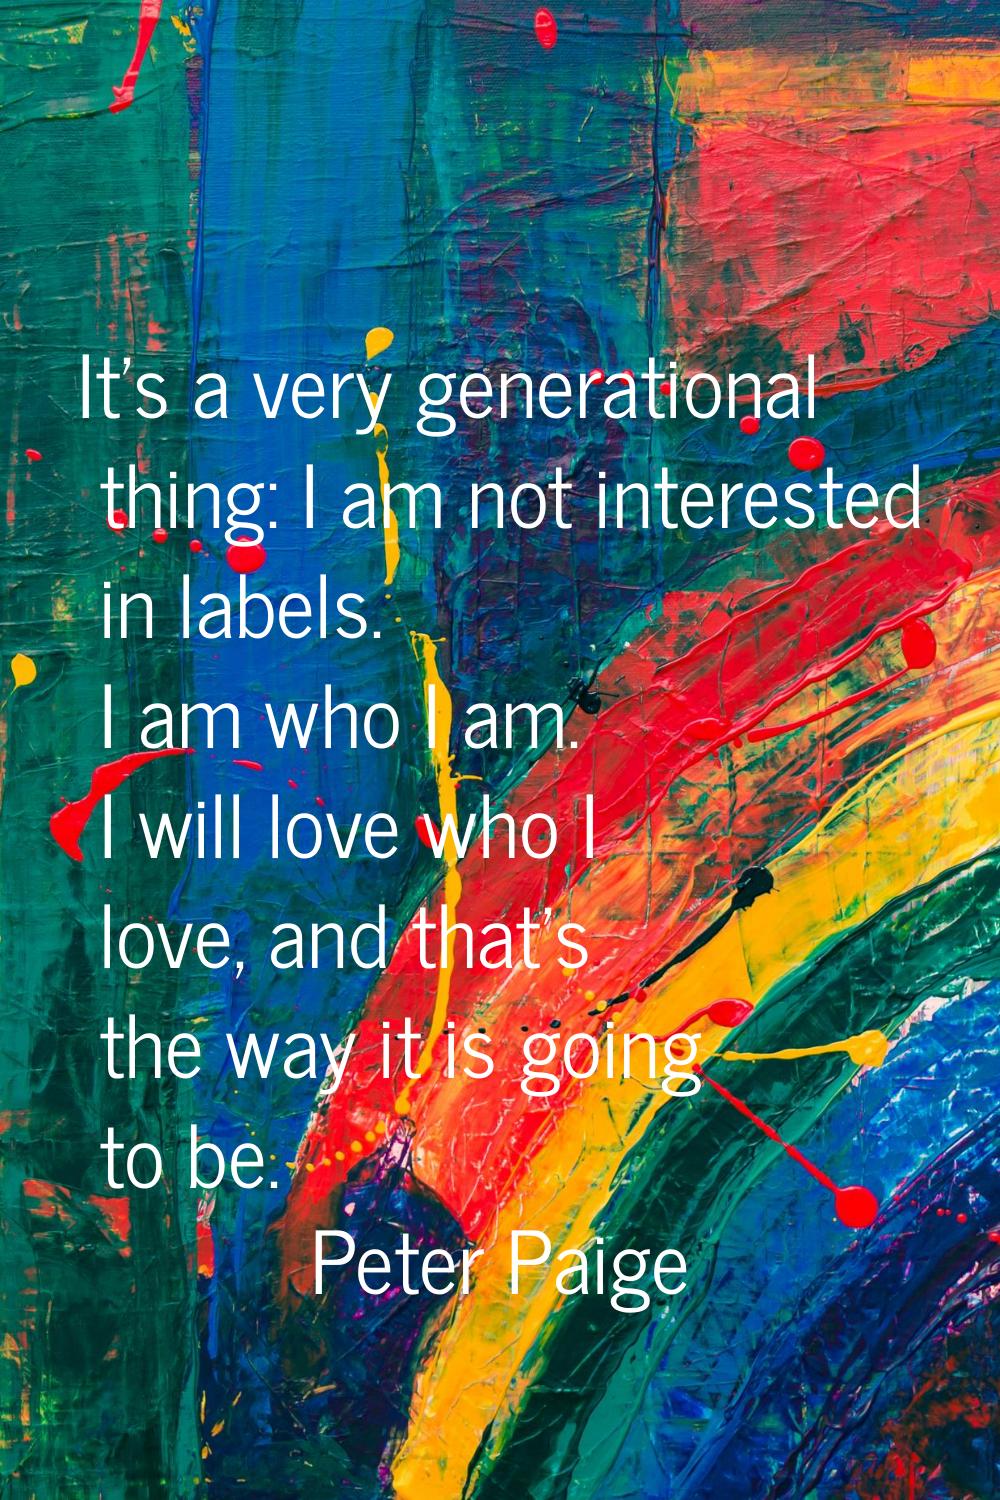 It's a very generational thing: I am not interested in labels. I am who I am. I will love who I lov